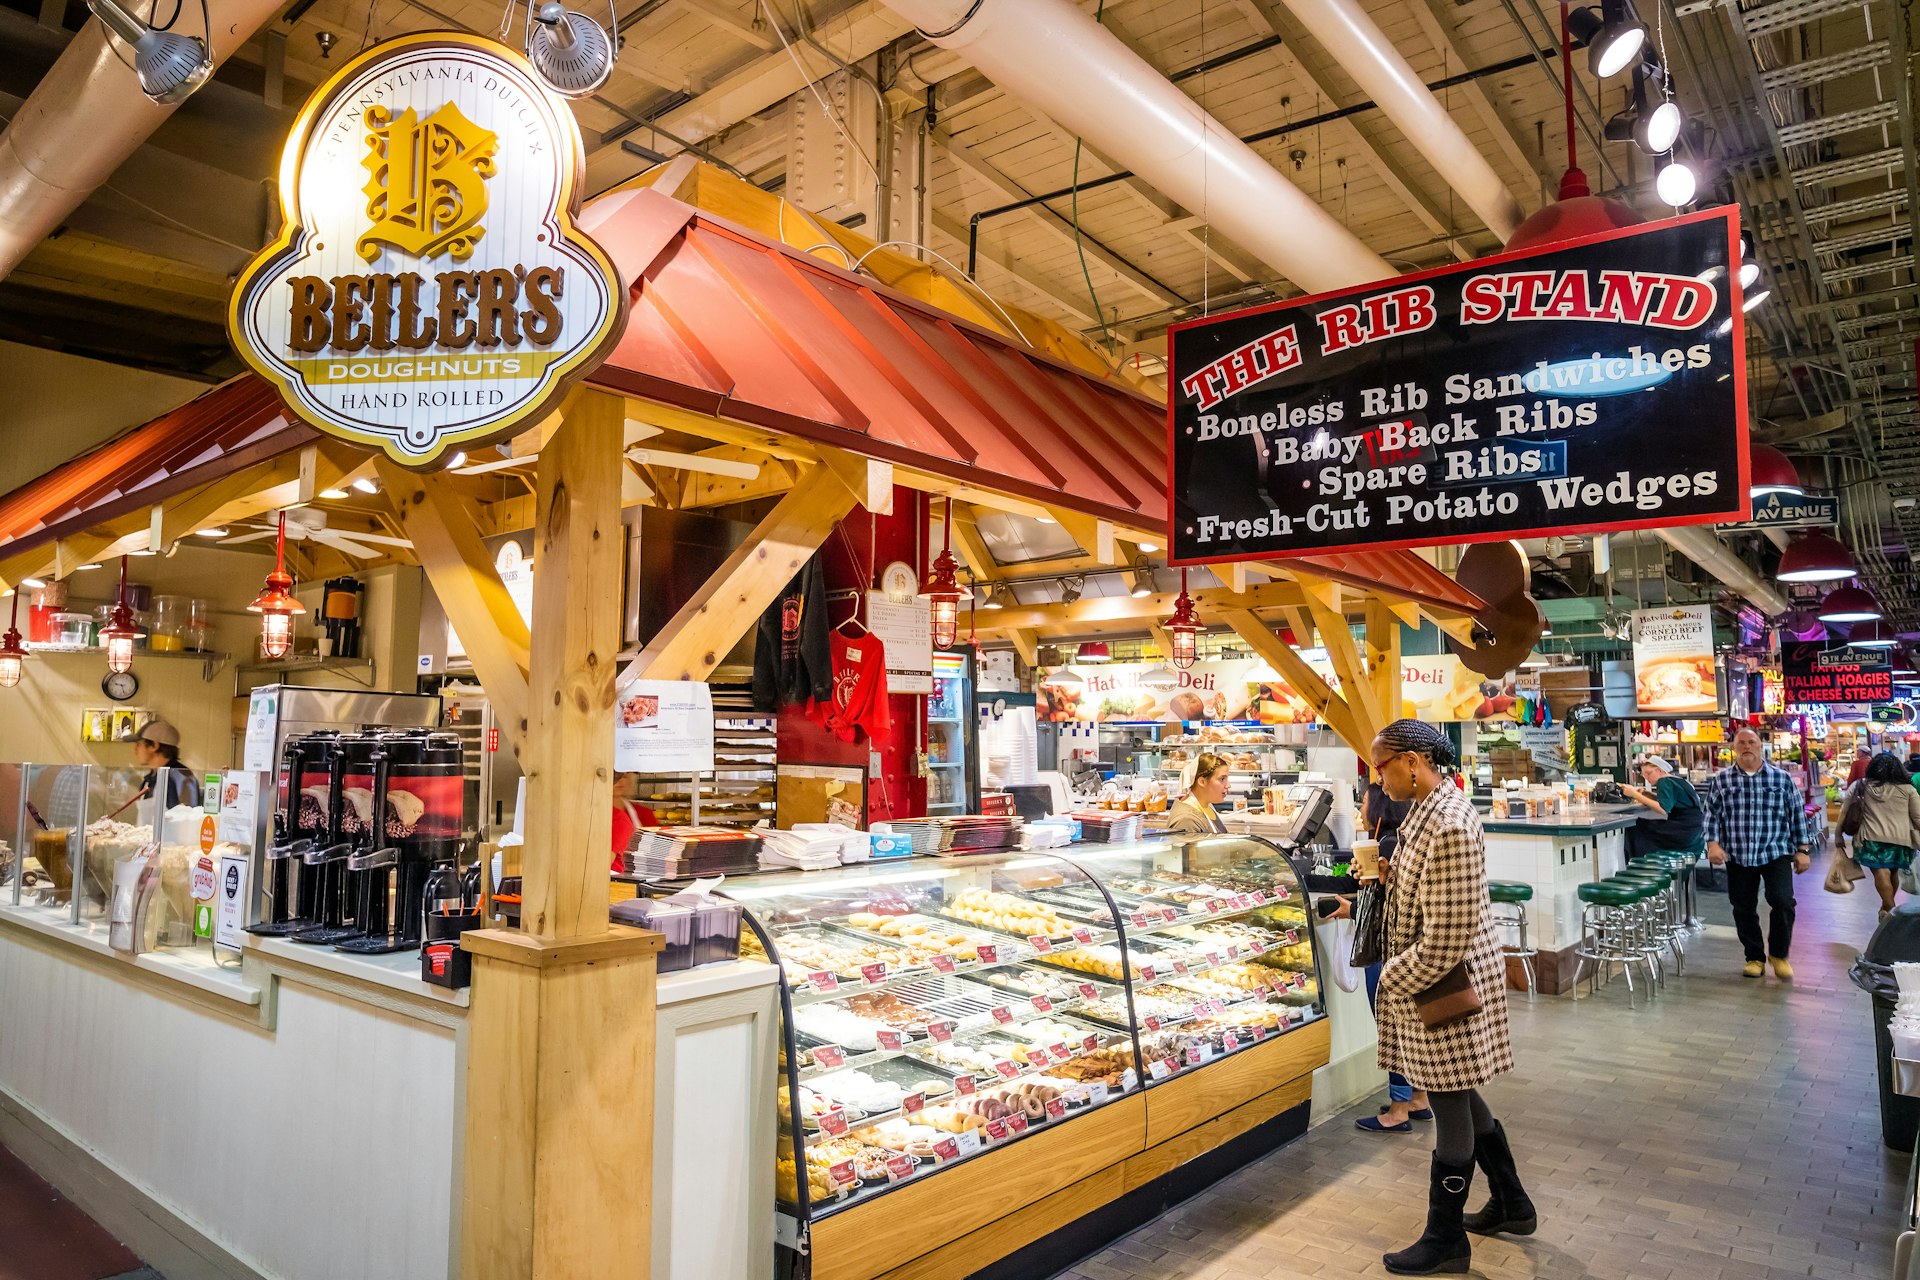 Beller's Doughnuts stall and the Rib Stand at Reading Terminal Market